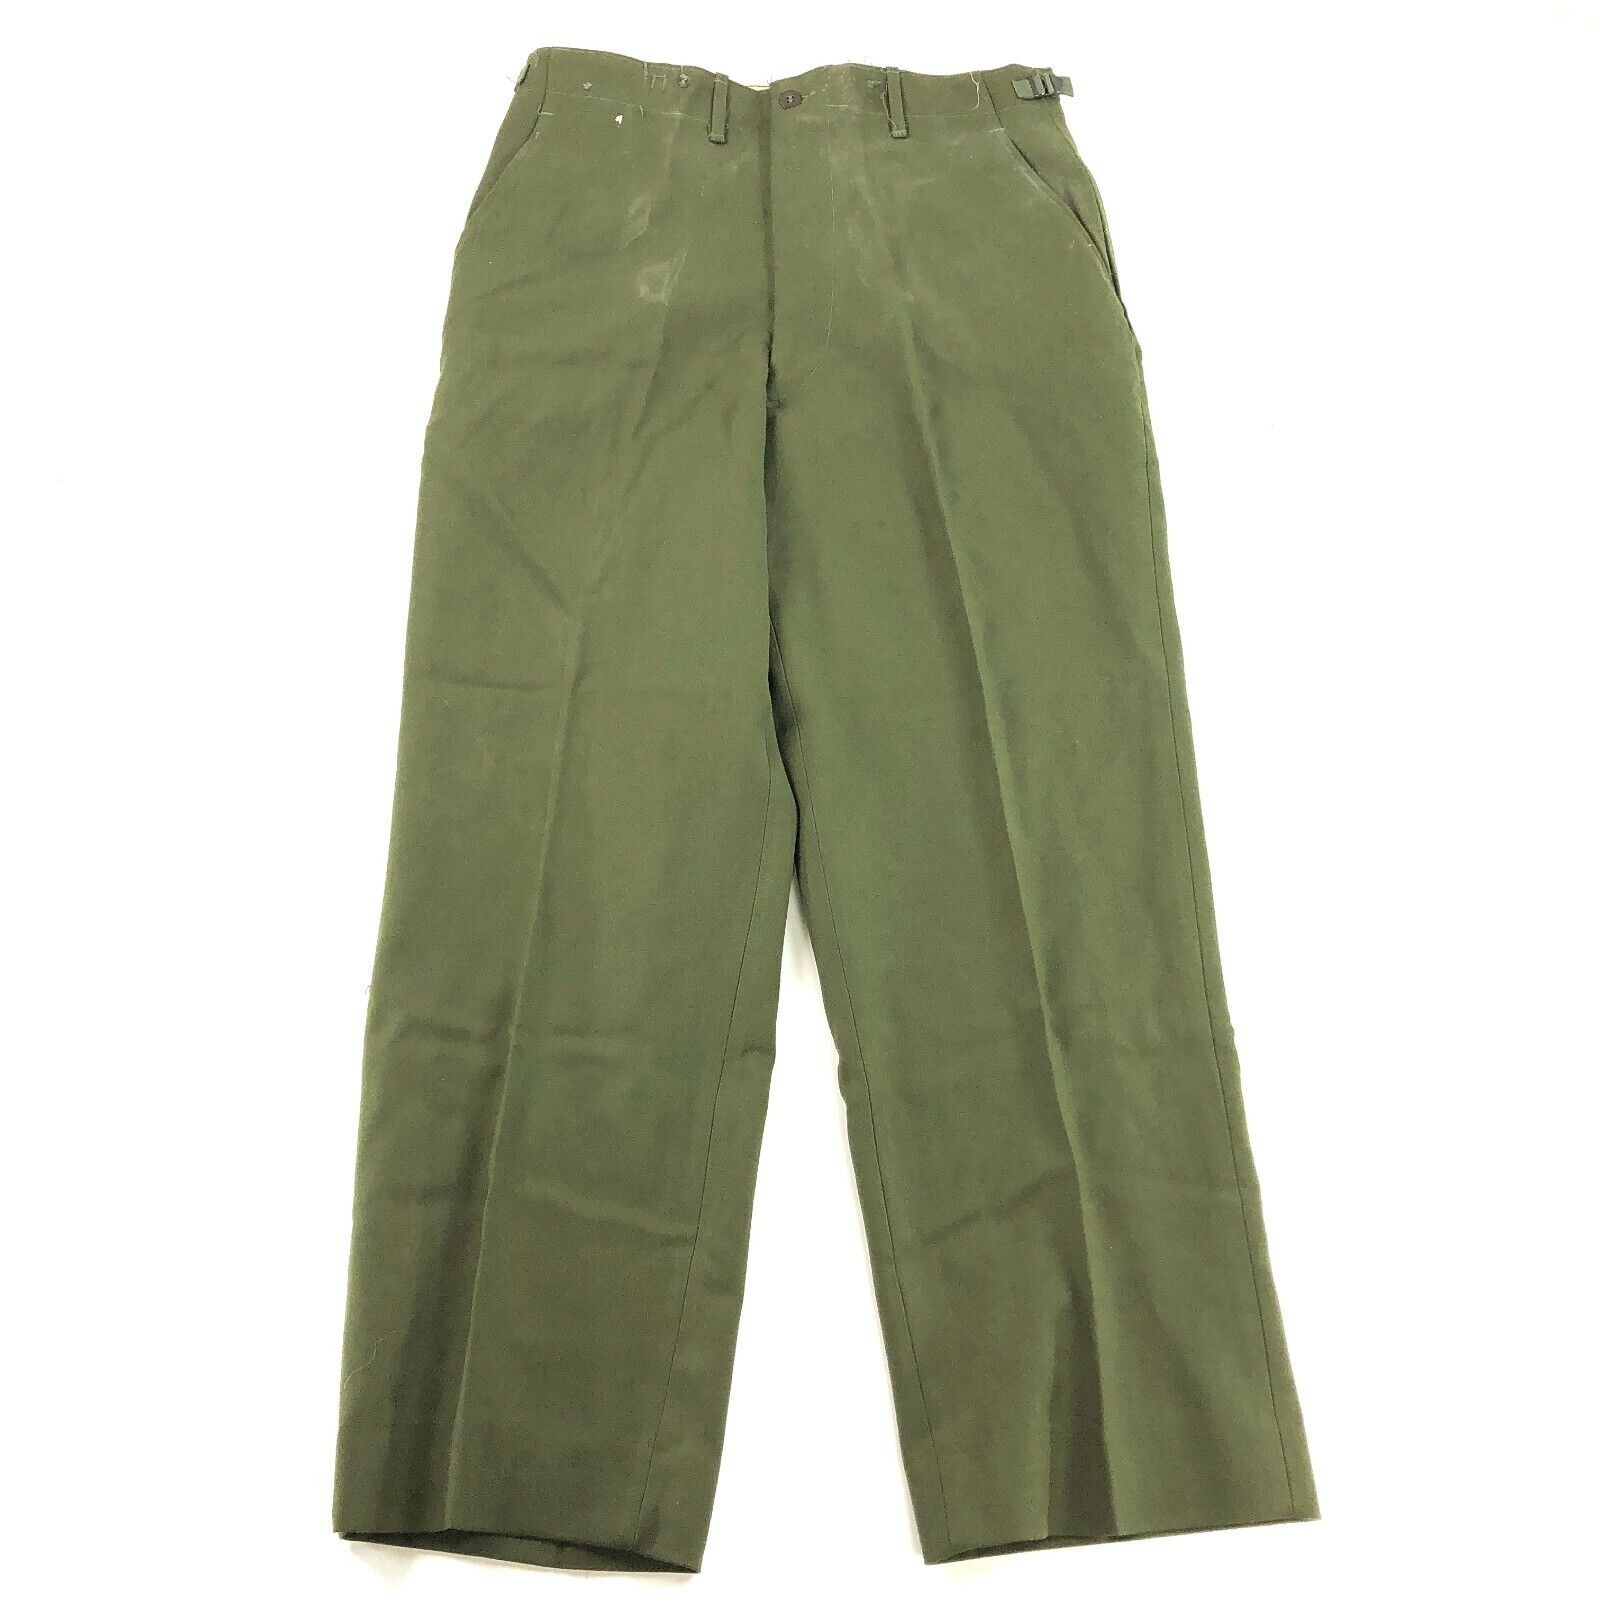 Army OG 108 Wool Trousers Vintage 1951 Winter Military Olive Green Pants DEFECT